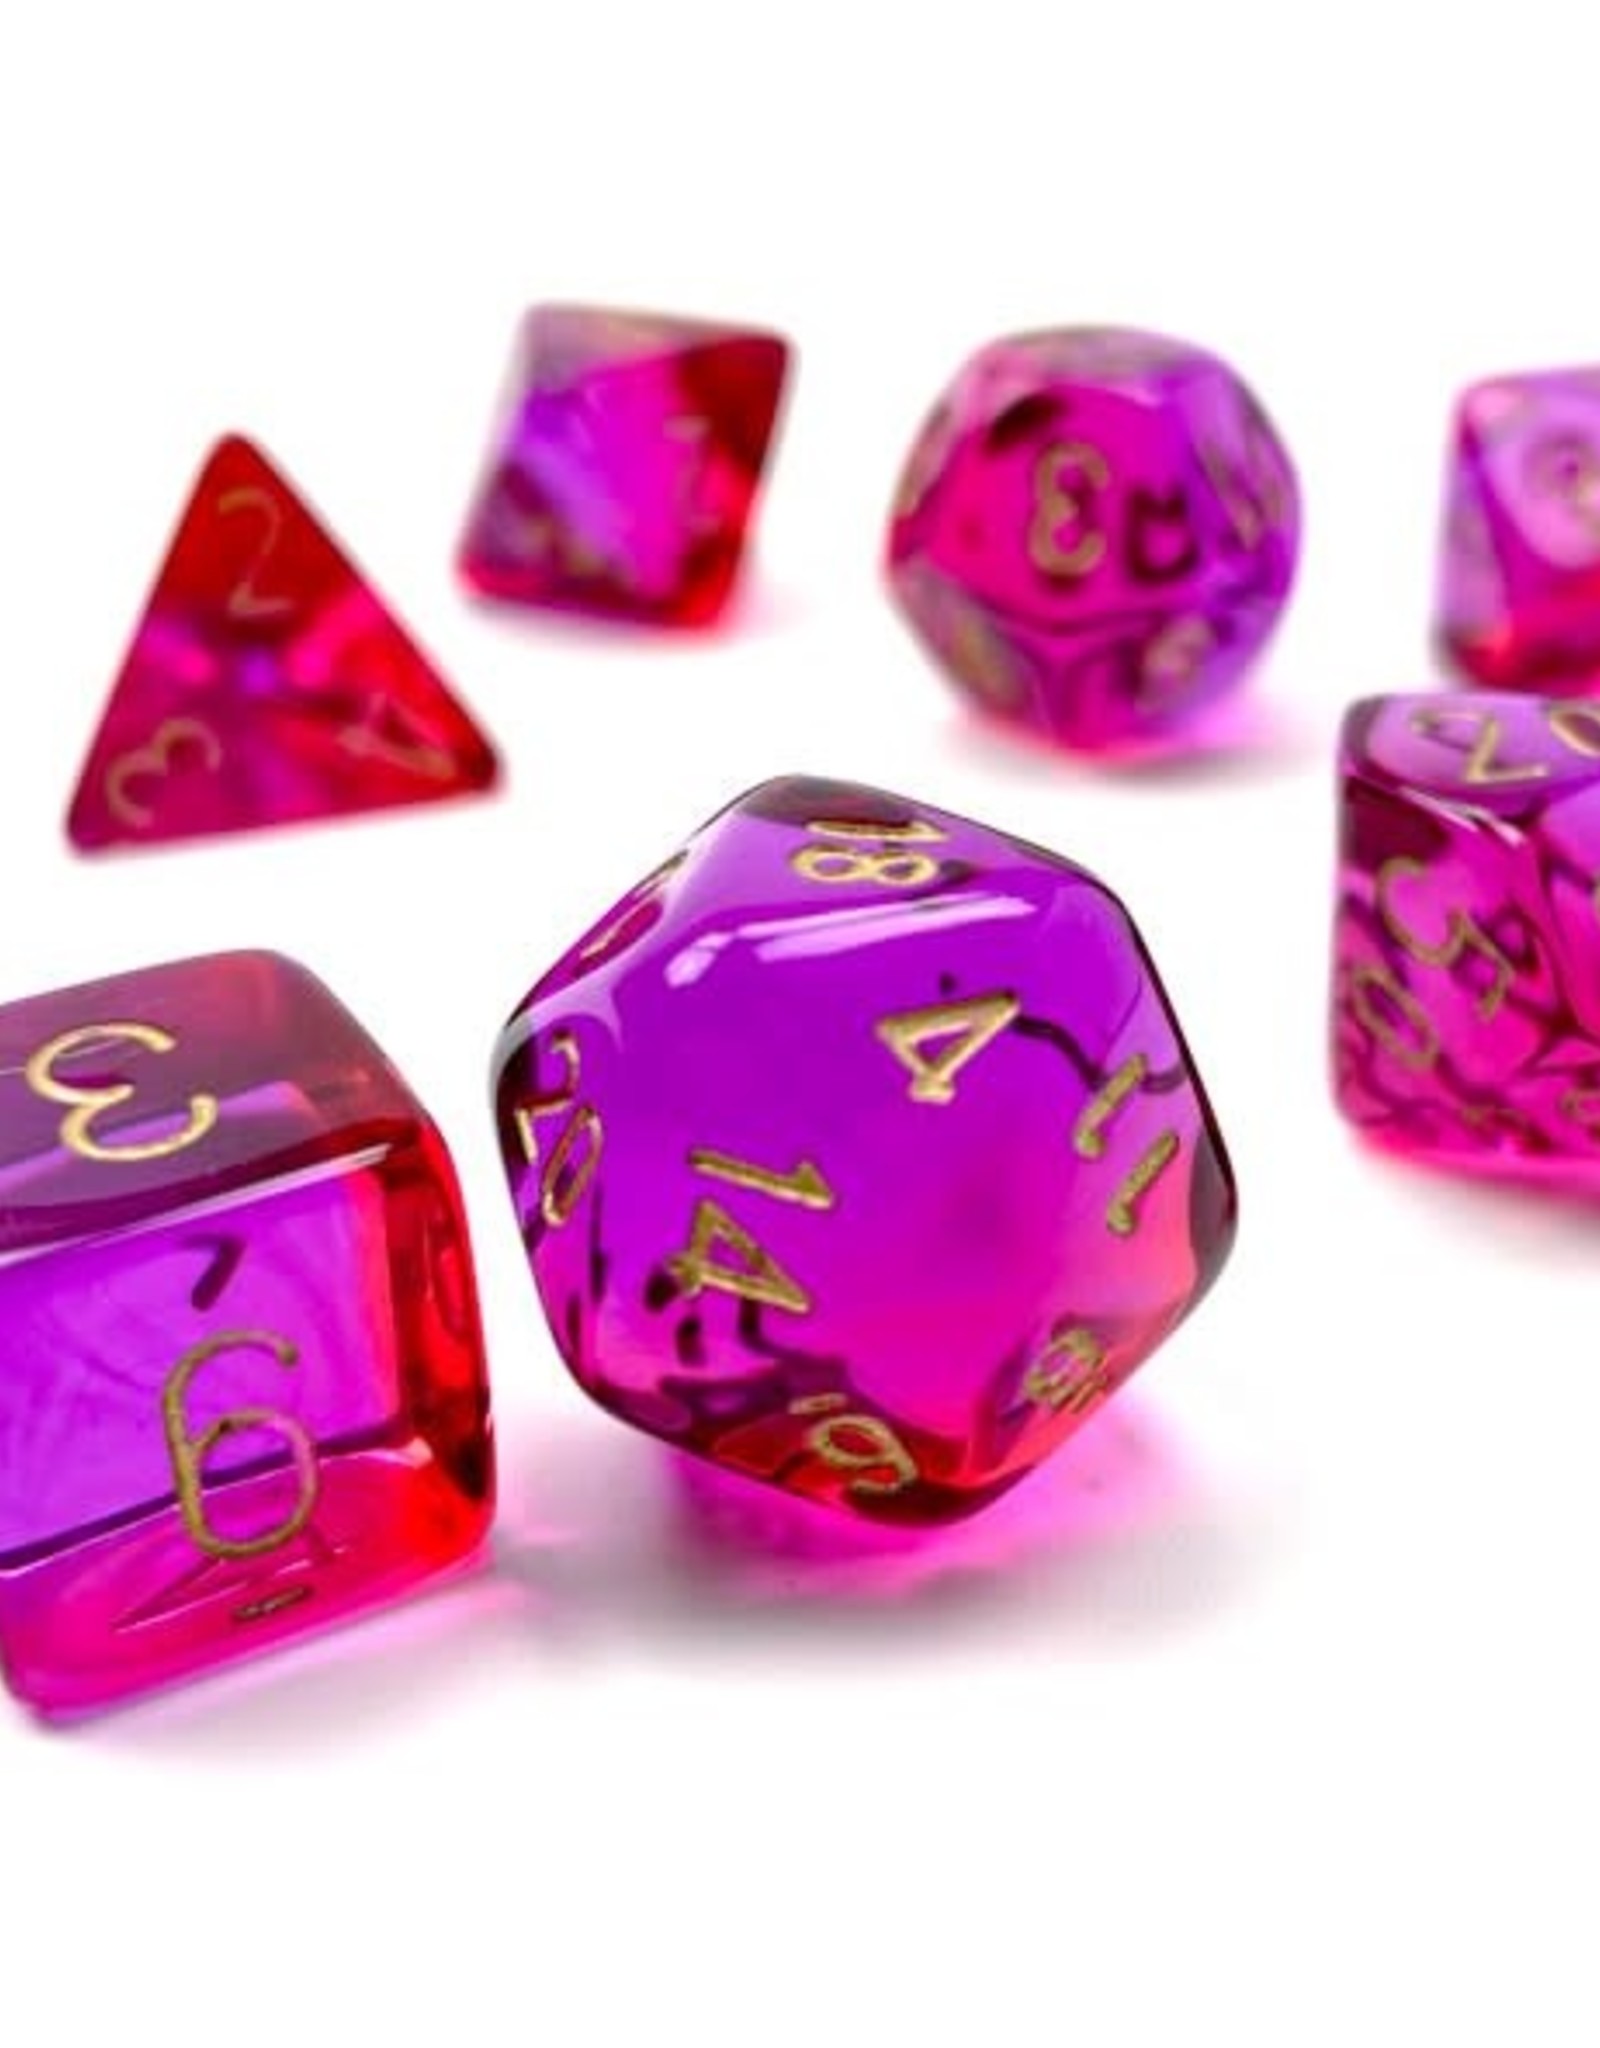 Polyhedral Dice Set: Luminary Gemini - Translucent Red-Violet/Gold